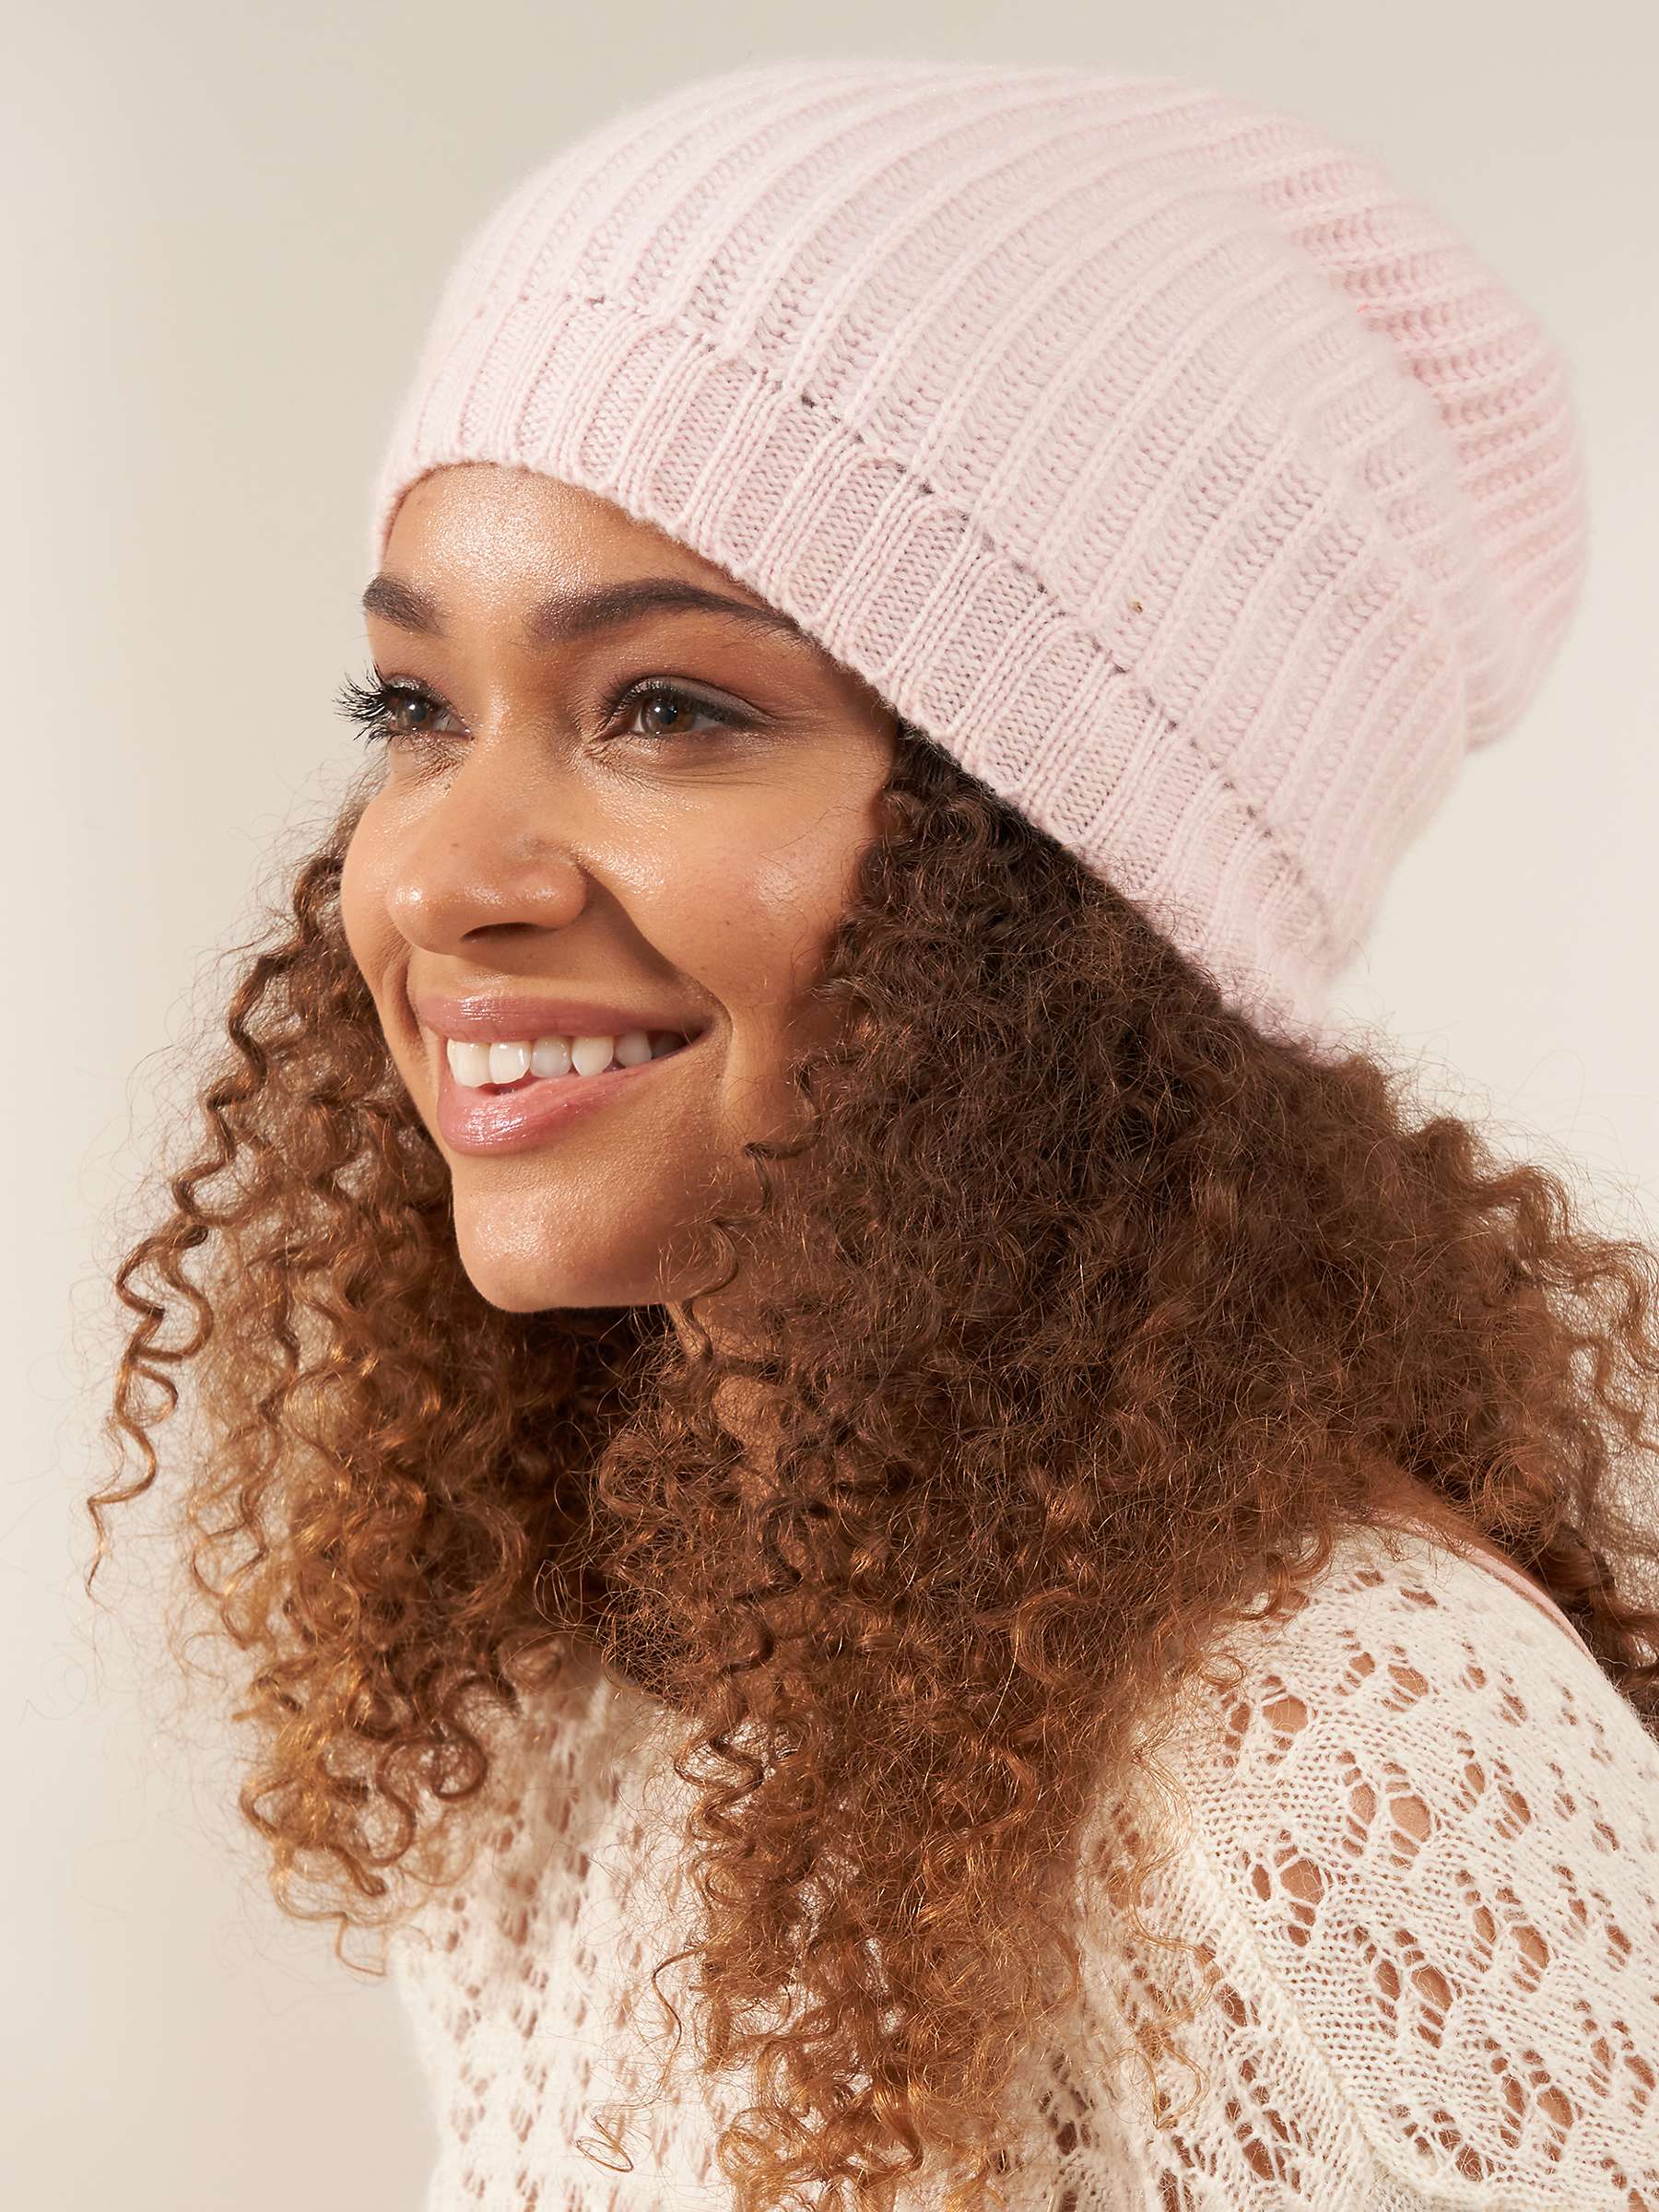 Buy Truly Fisherman Rib Cashmere Hat Online at johnlewis.com